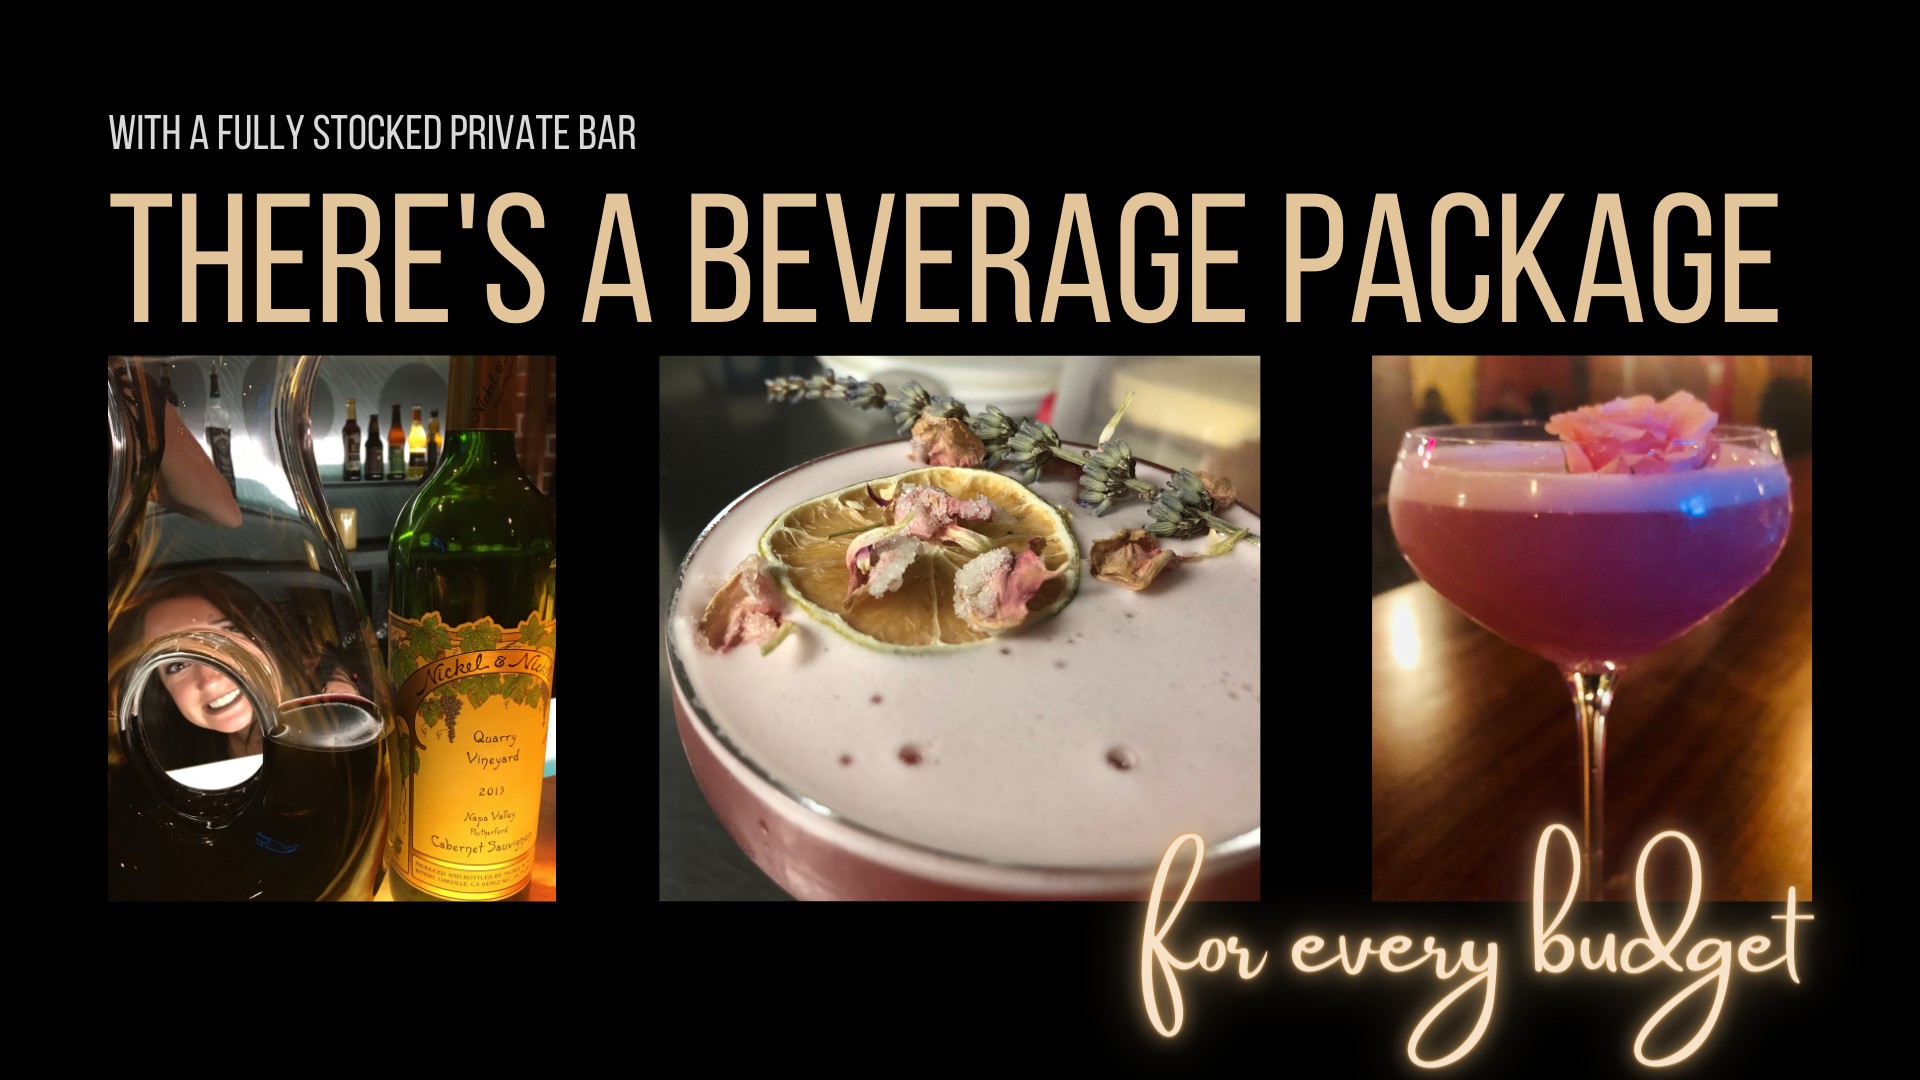 with a fully stocked private bar, there's a Beverage Package for every budget 